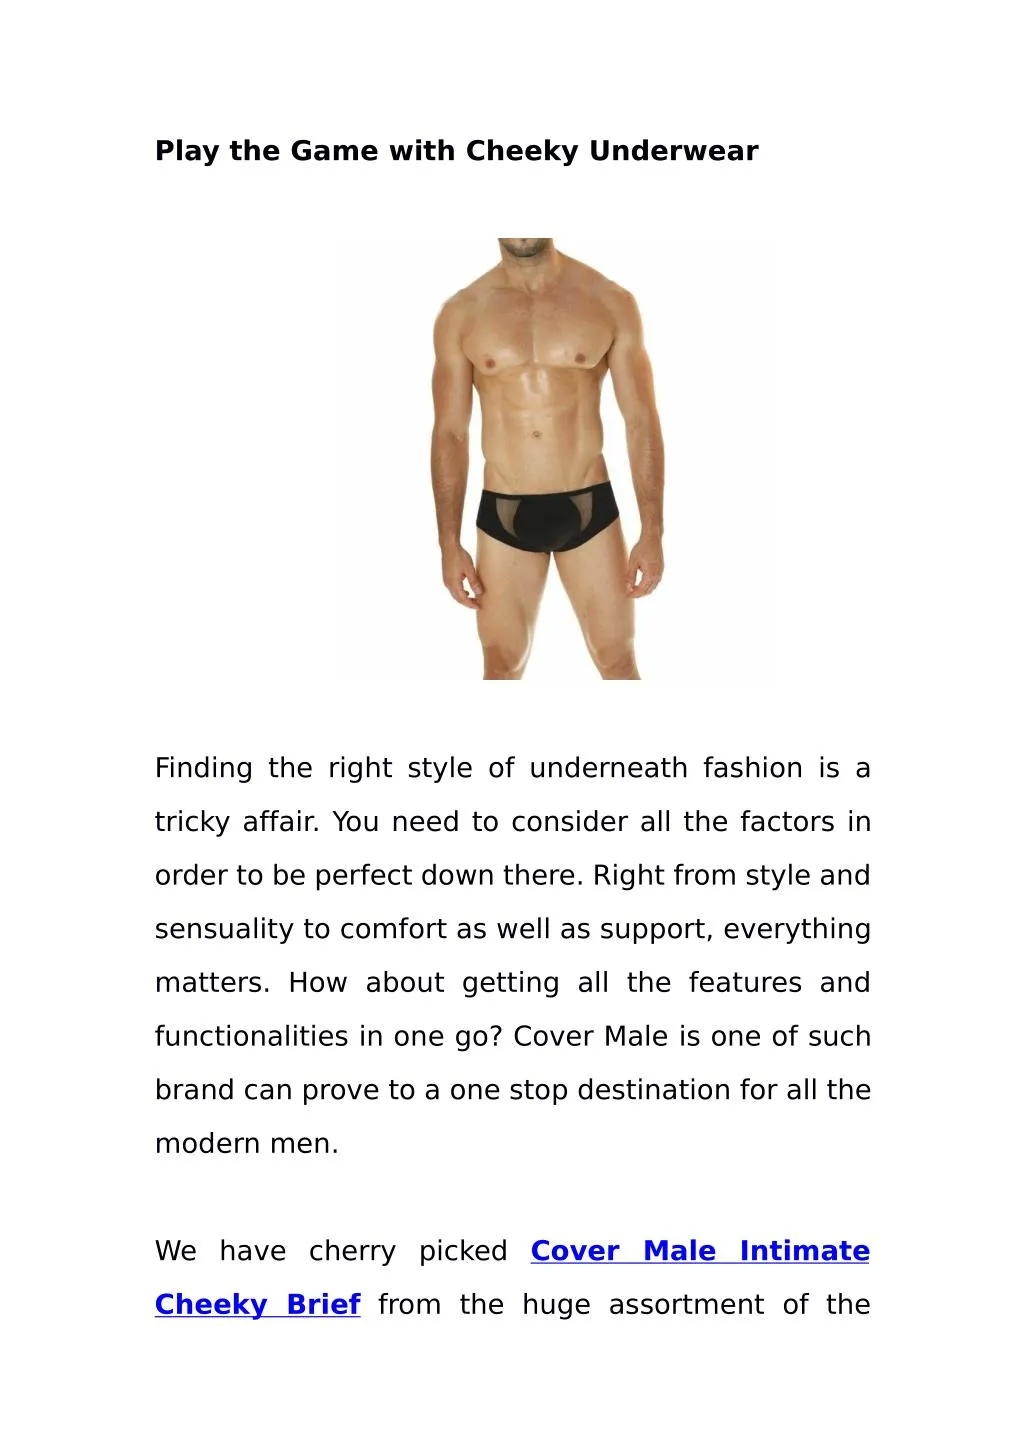 play the game with cheeky underwear